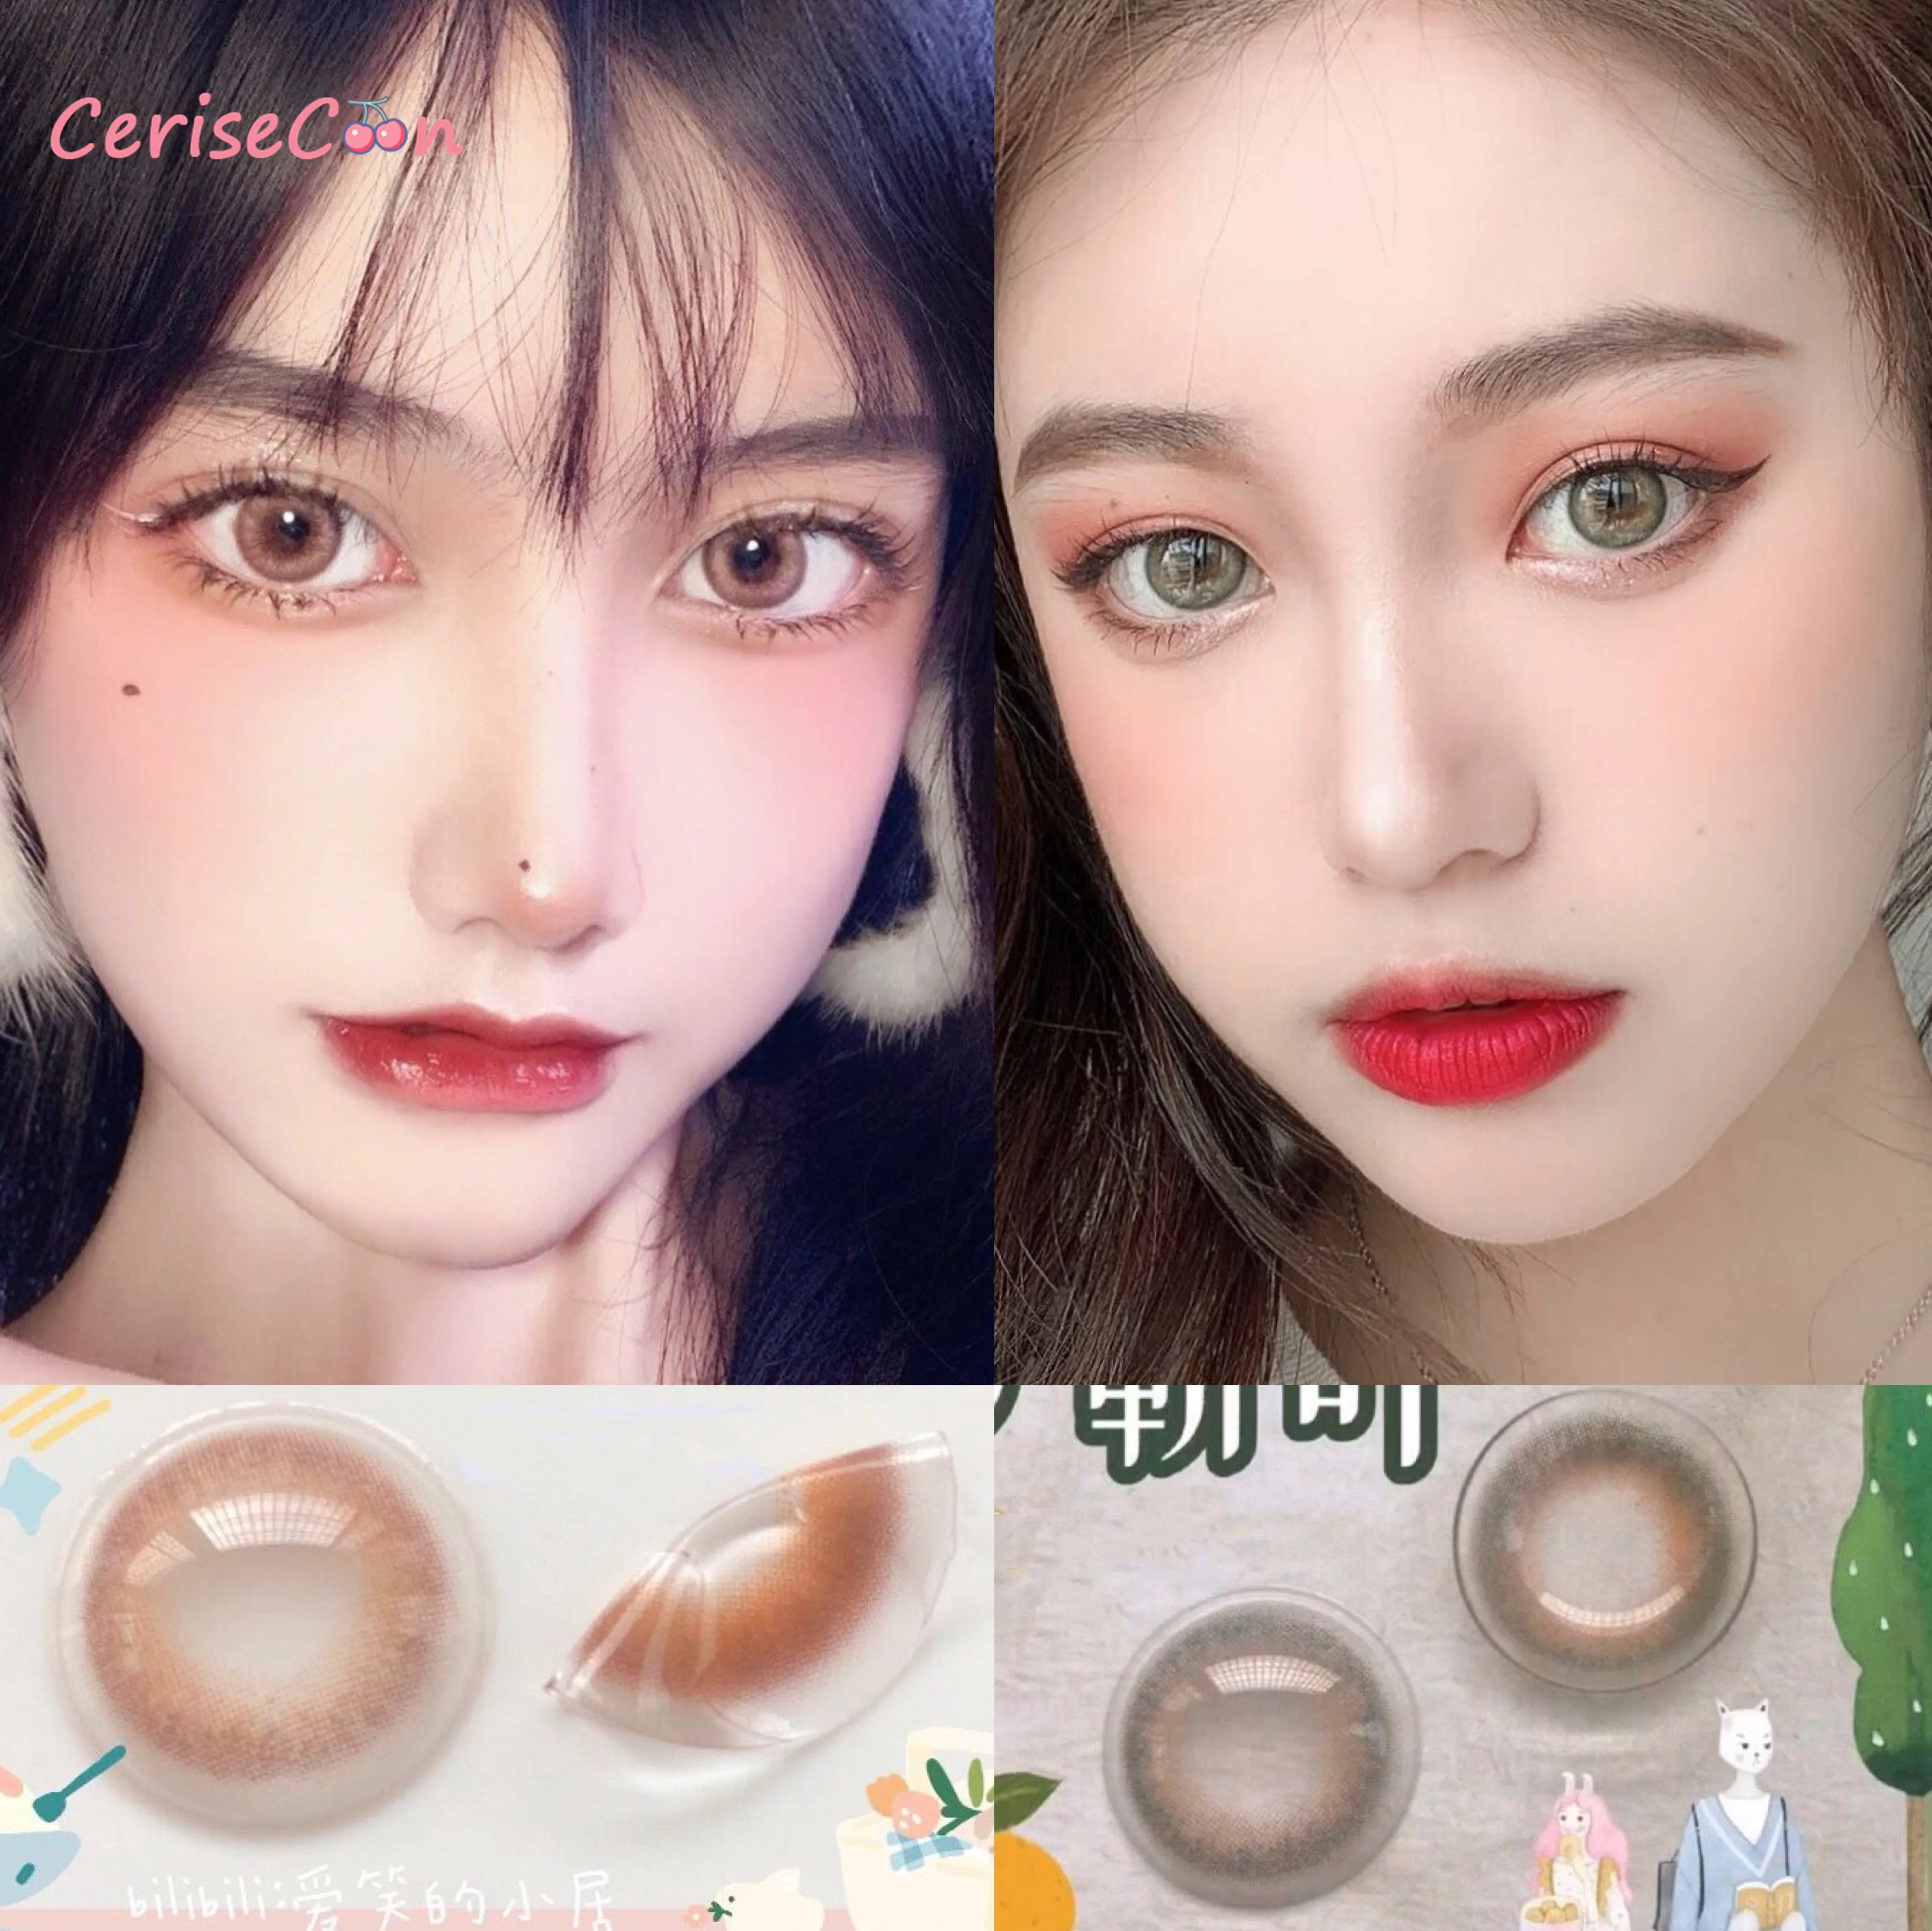 

Cerisecon Basil pink brown Colored Contact Lenses Cosmetic small beauty pupil Natural lens for Eyes Myopia prescription degrees